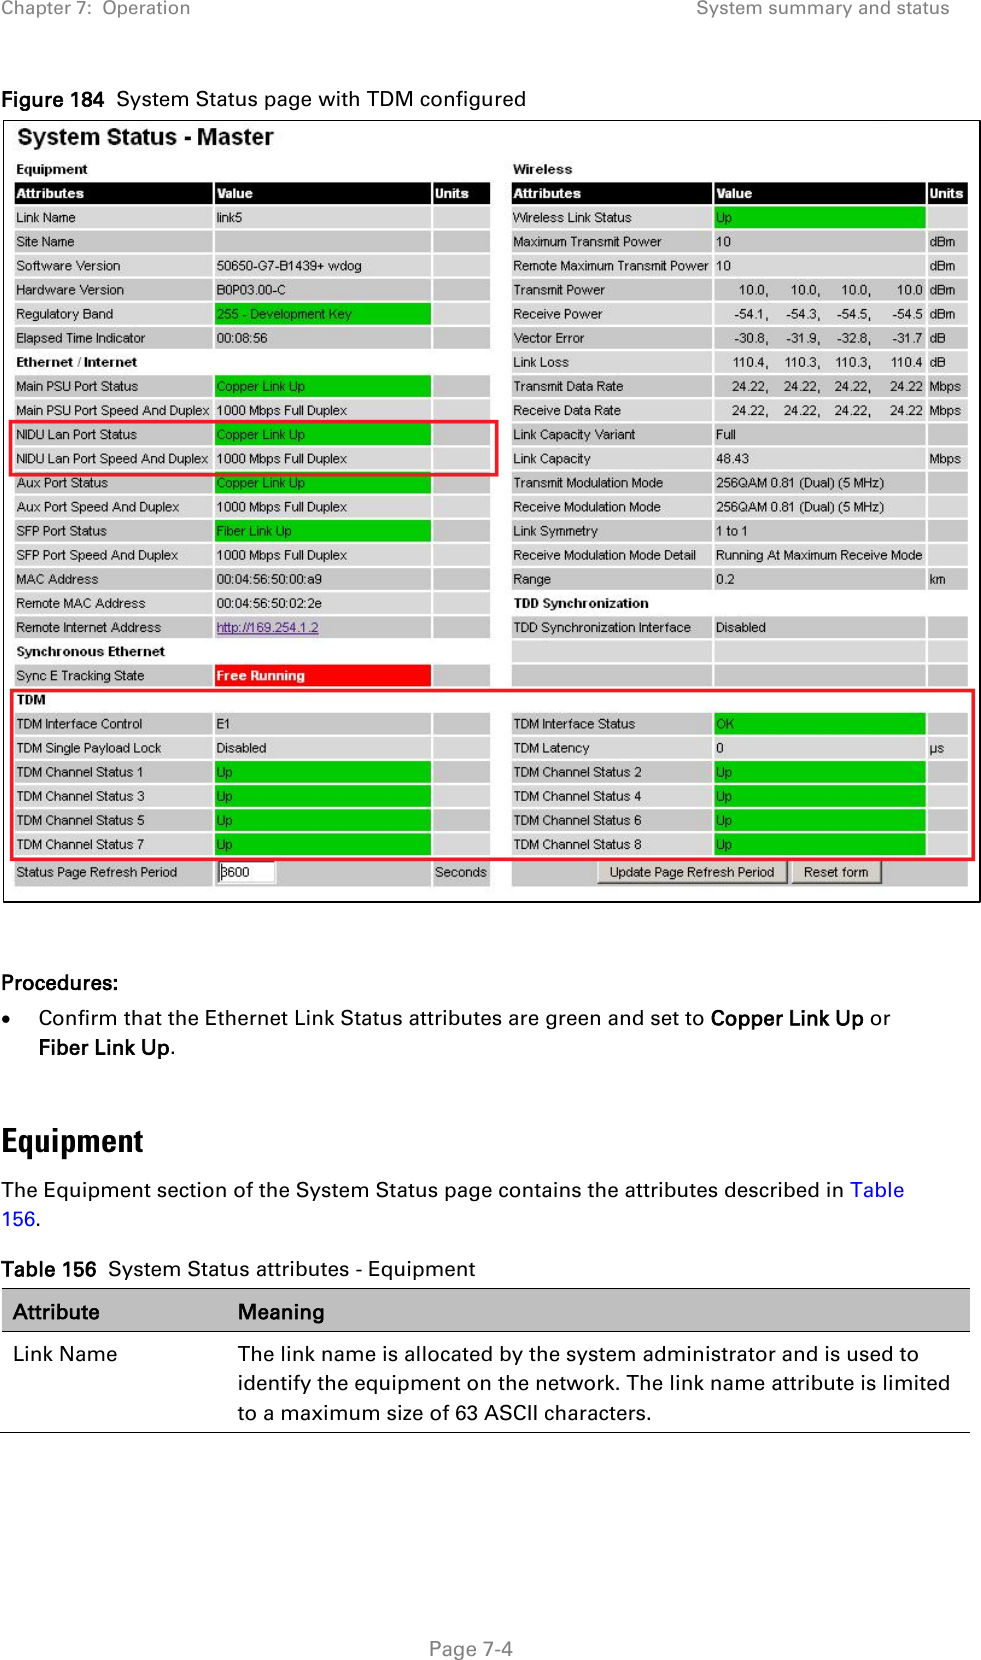 Chapter 7:  Operation System summary and status  Figure 184  System Status page with TDM configured   Procedures: • Confirm that the Ethernet Link Status attributes are green and set to Copper Link Up or Fiber Link Up.  Equipment The Equipment section of the System Status page contains the attributes described in Table 156. Table 156  System Status attributes - Equipment Attribute Meaning Link Name The link name is allocated by the system administrator and is used to identify the equipment on the network. The link name attribute is limited to a maximum size of 63 ASCII characters.  Page 7-4 